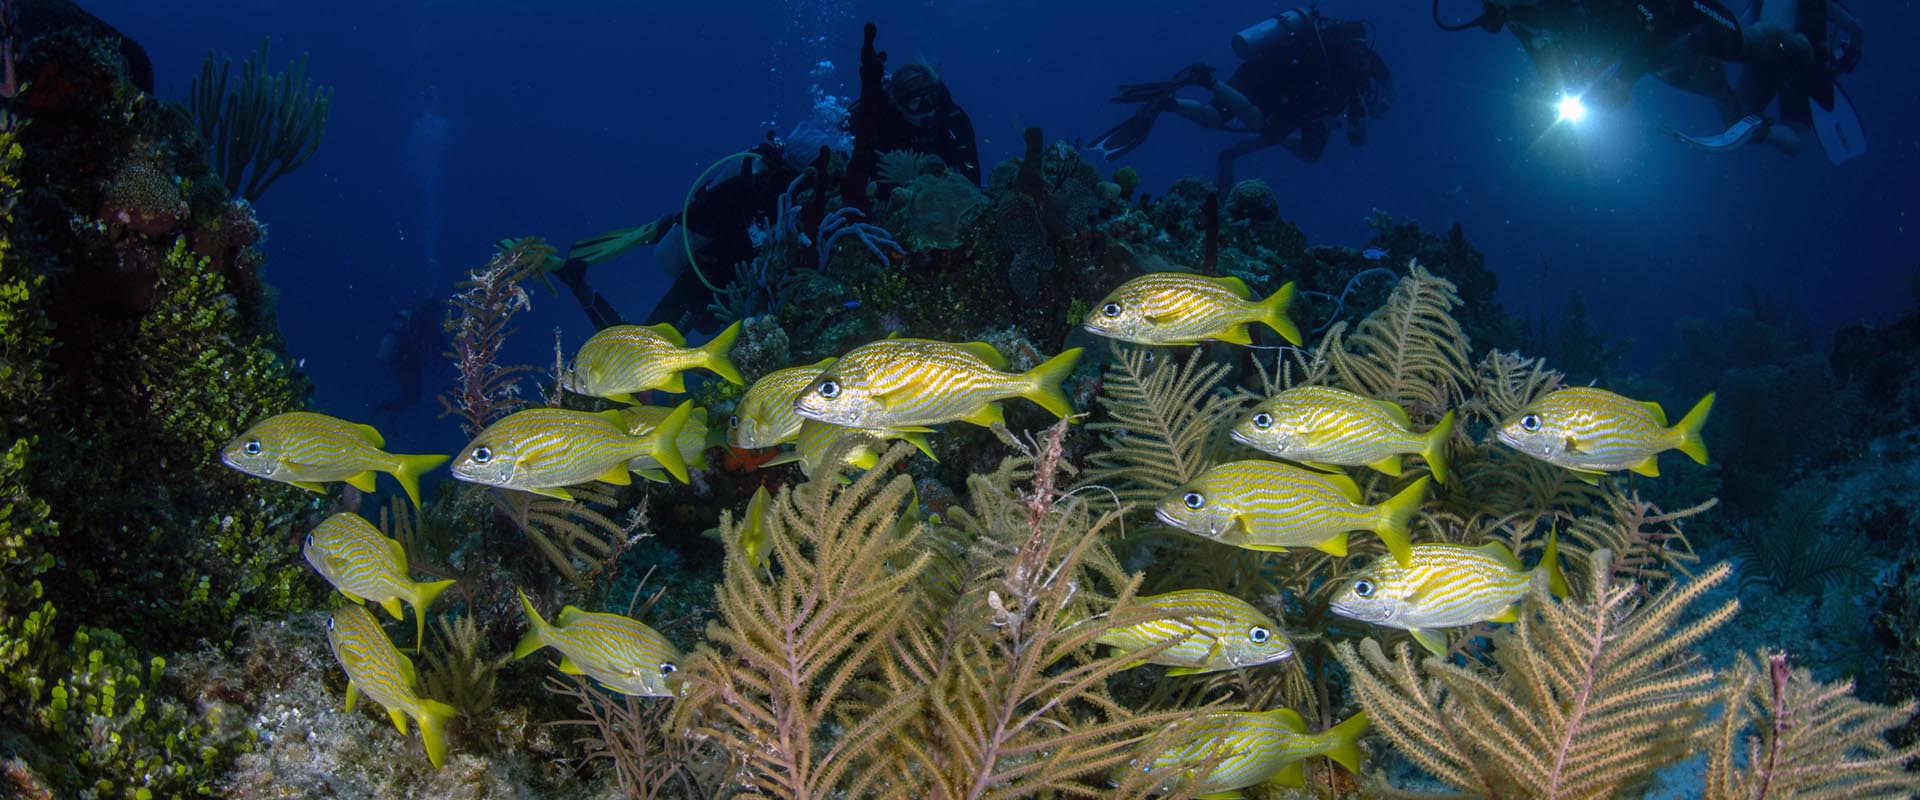 French Cay Liveaboard Diving